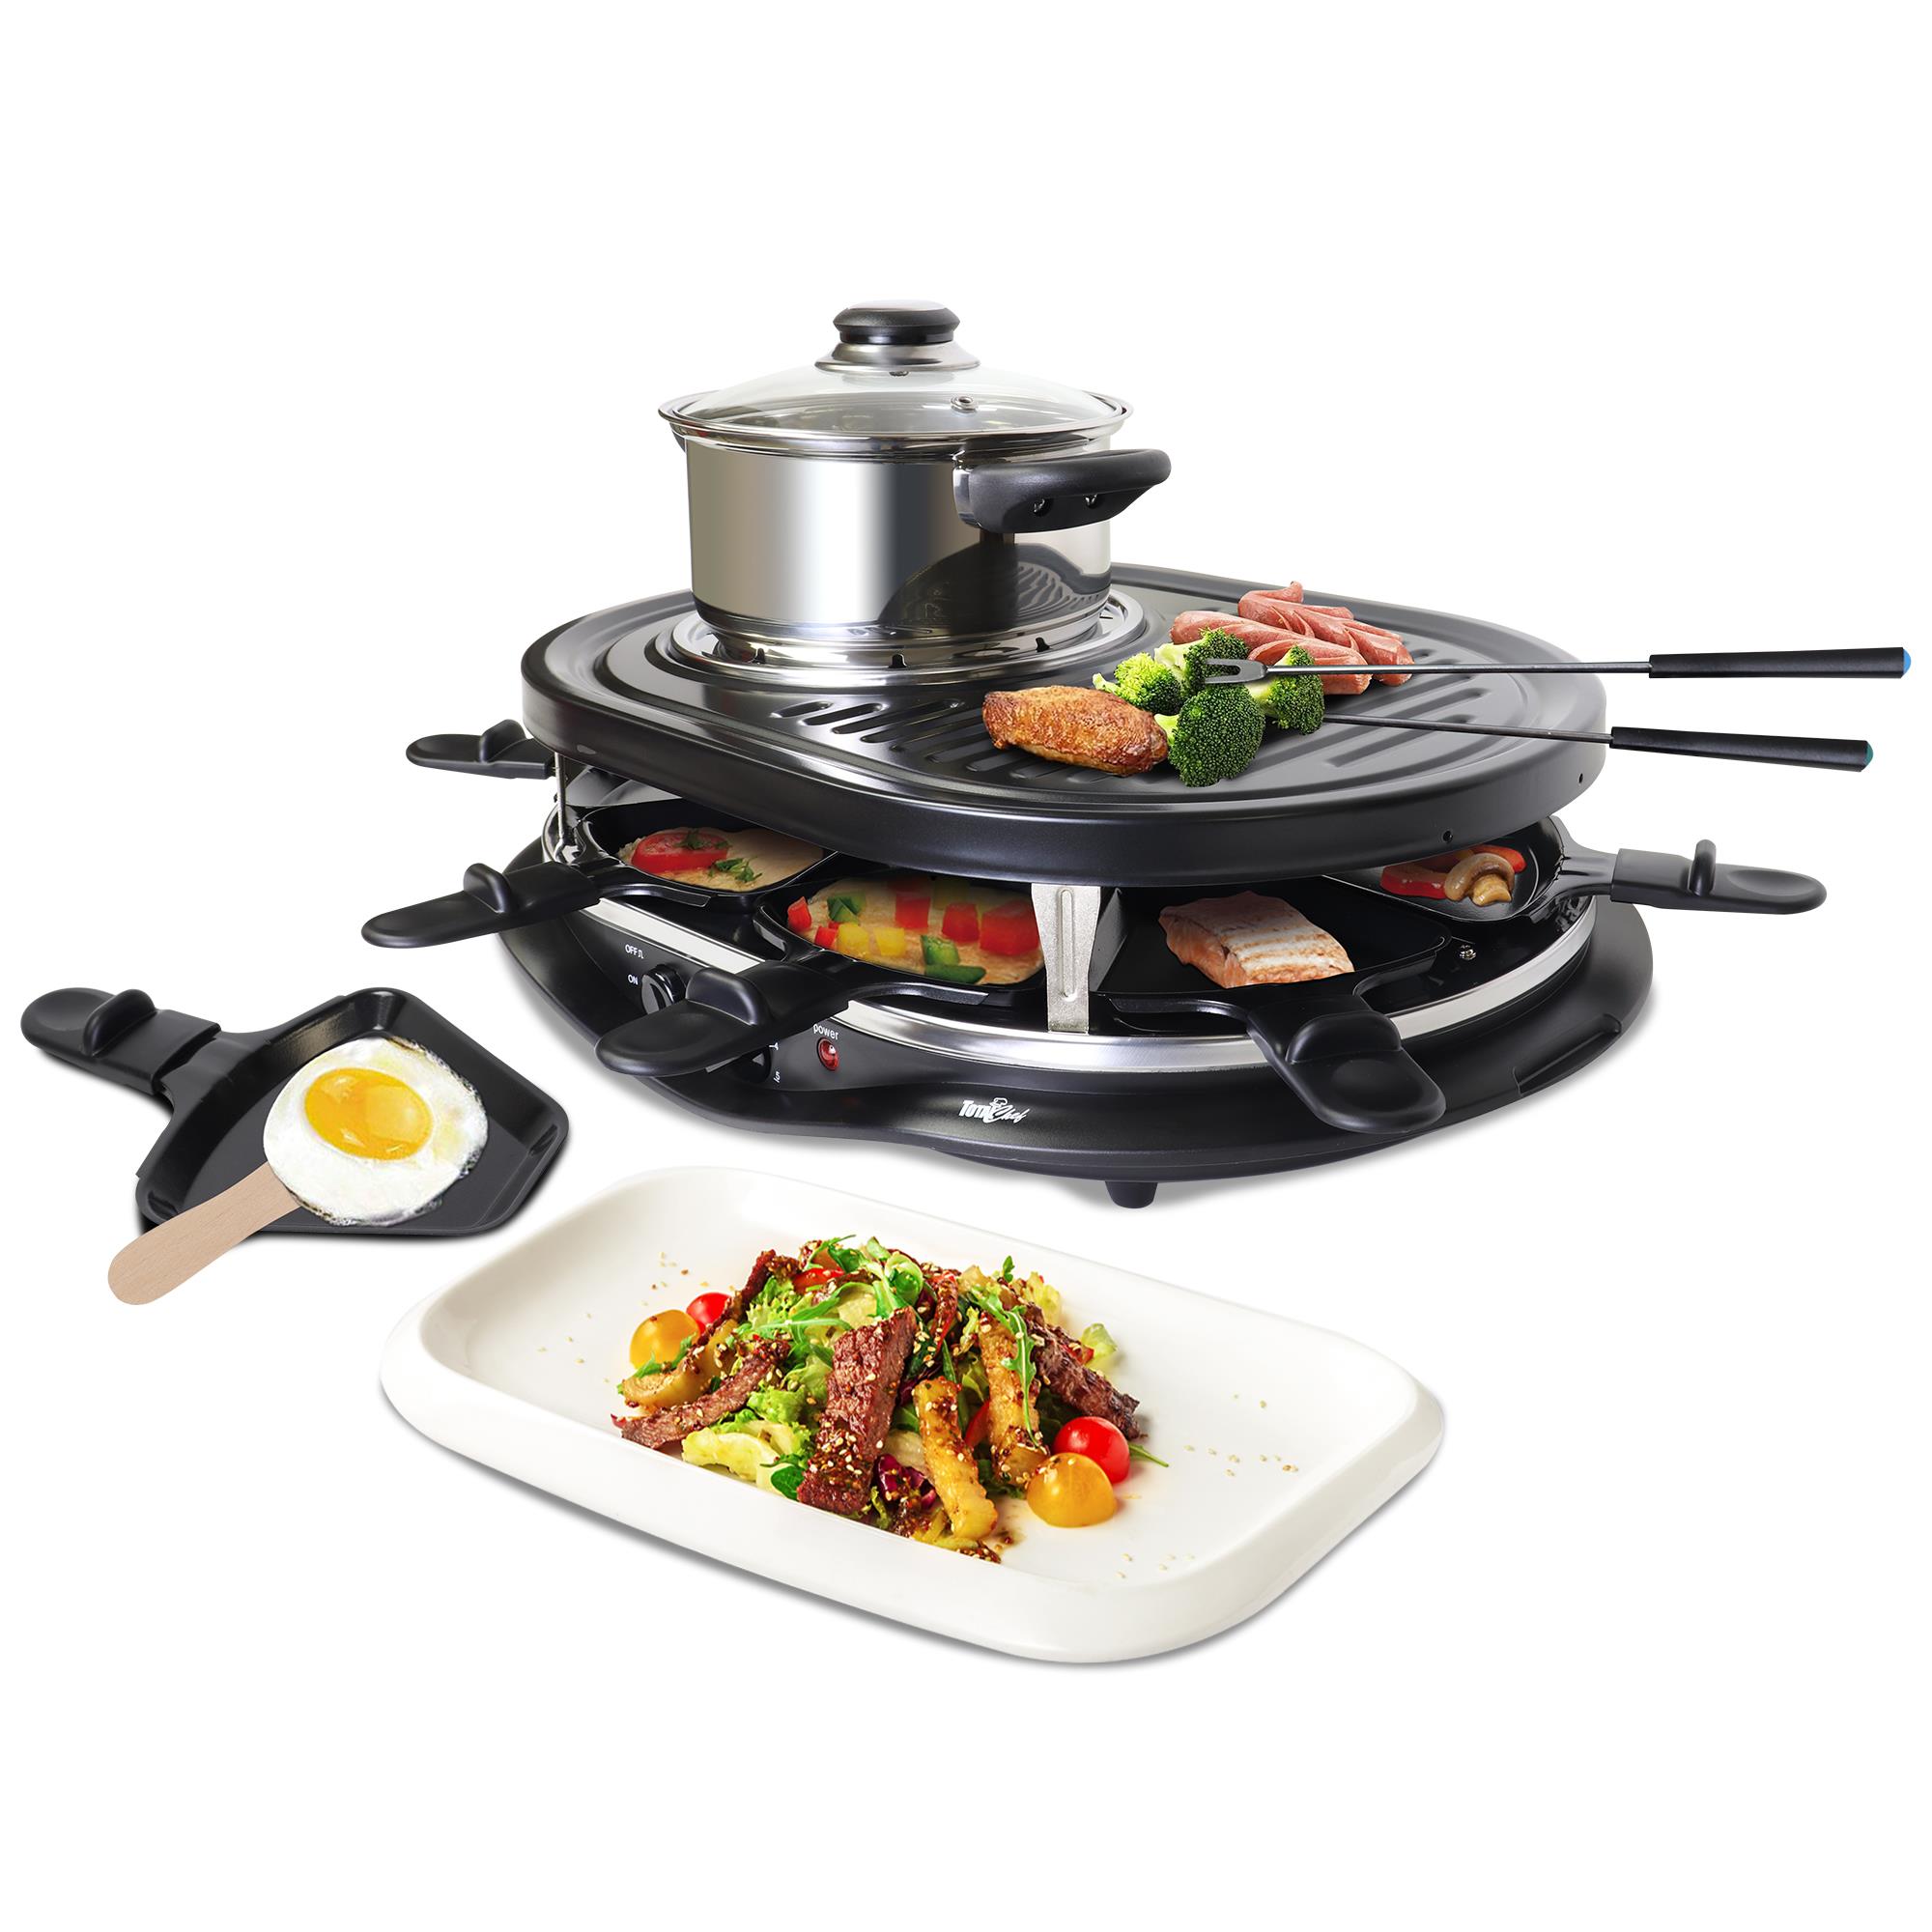 Kitchen Living 8 Person Raclette Party Grill Non Stick NEW IN BOX NICE!!!